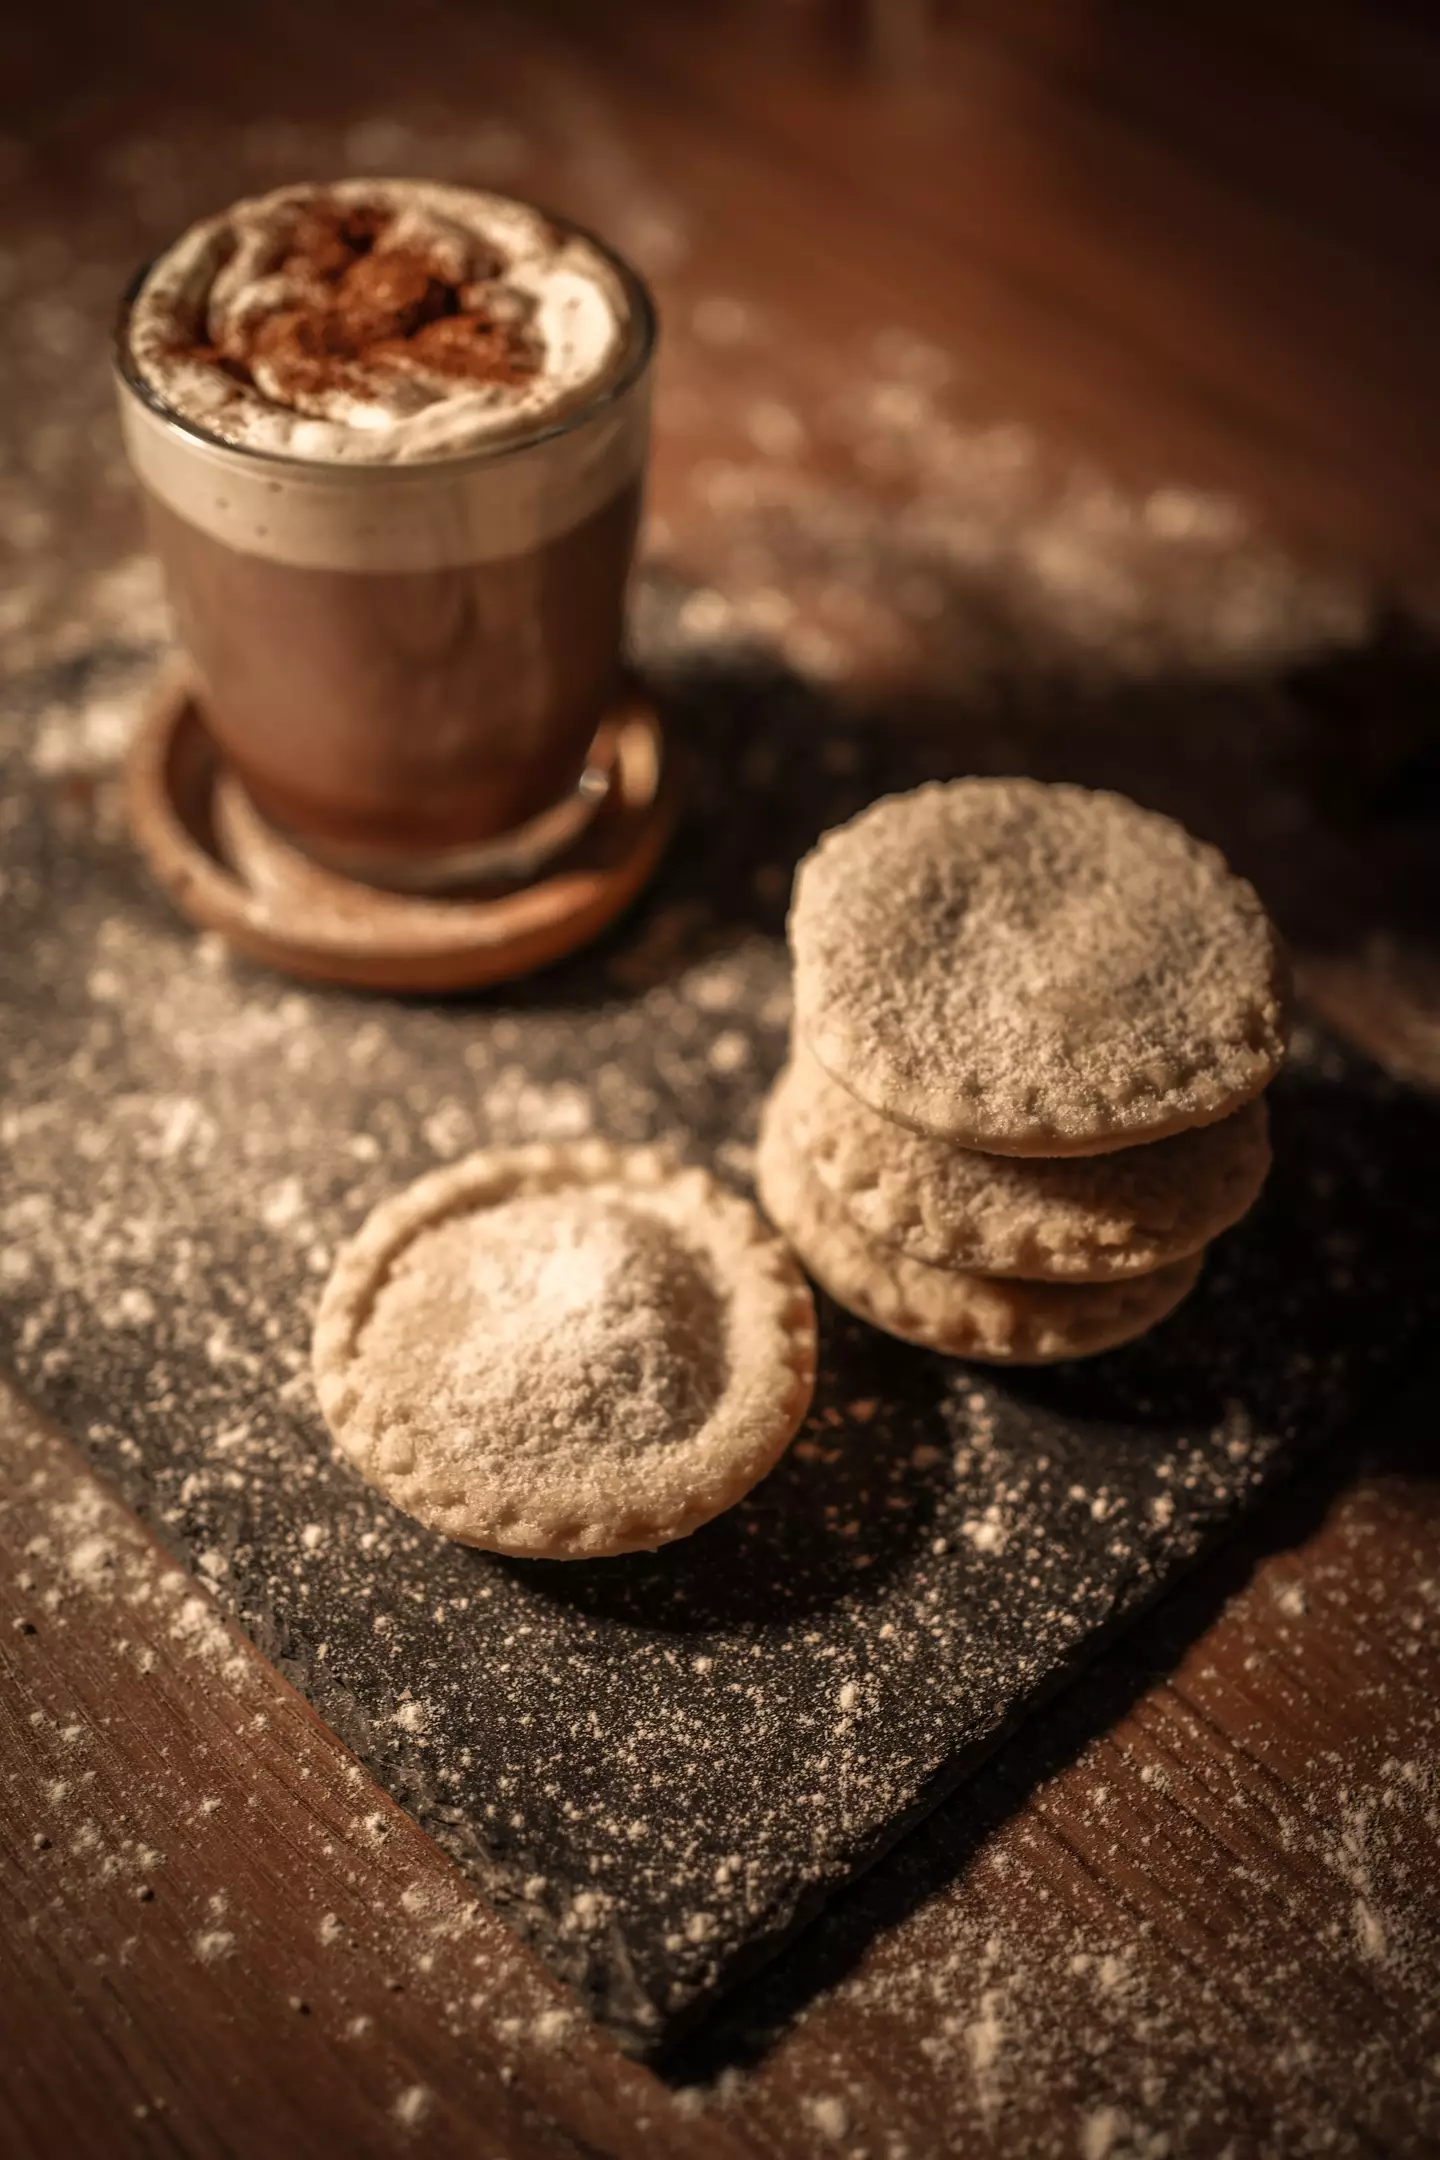 17 percent of surveyed people want mince pies included in their British 'picky bits' tea.